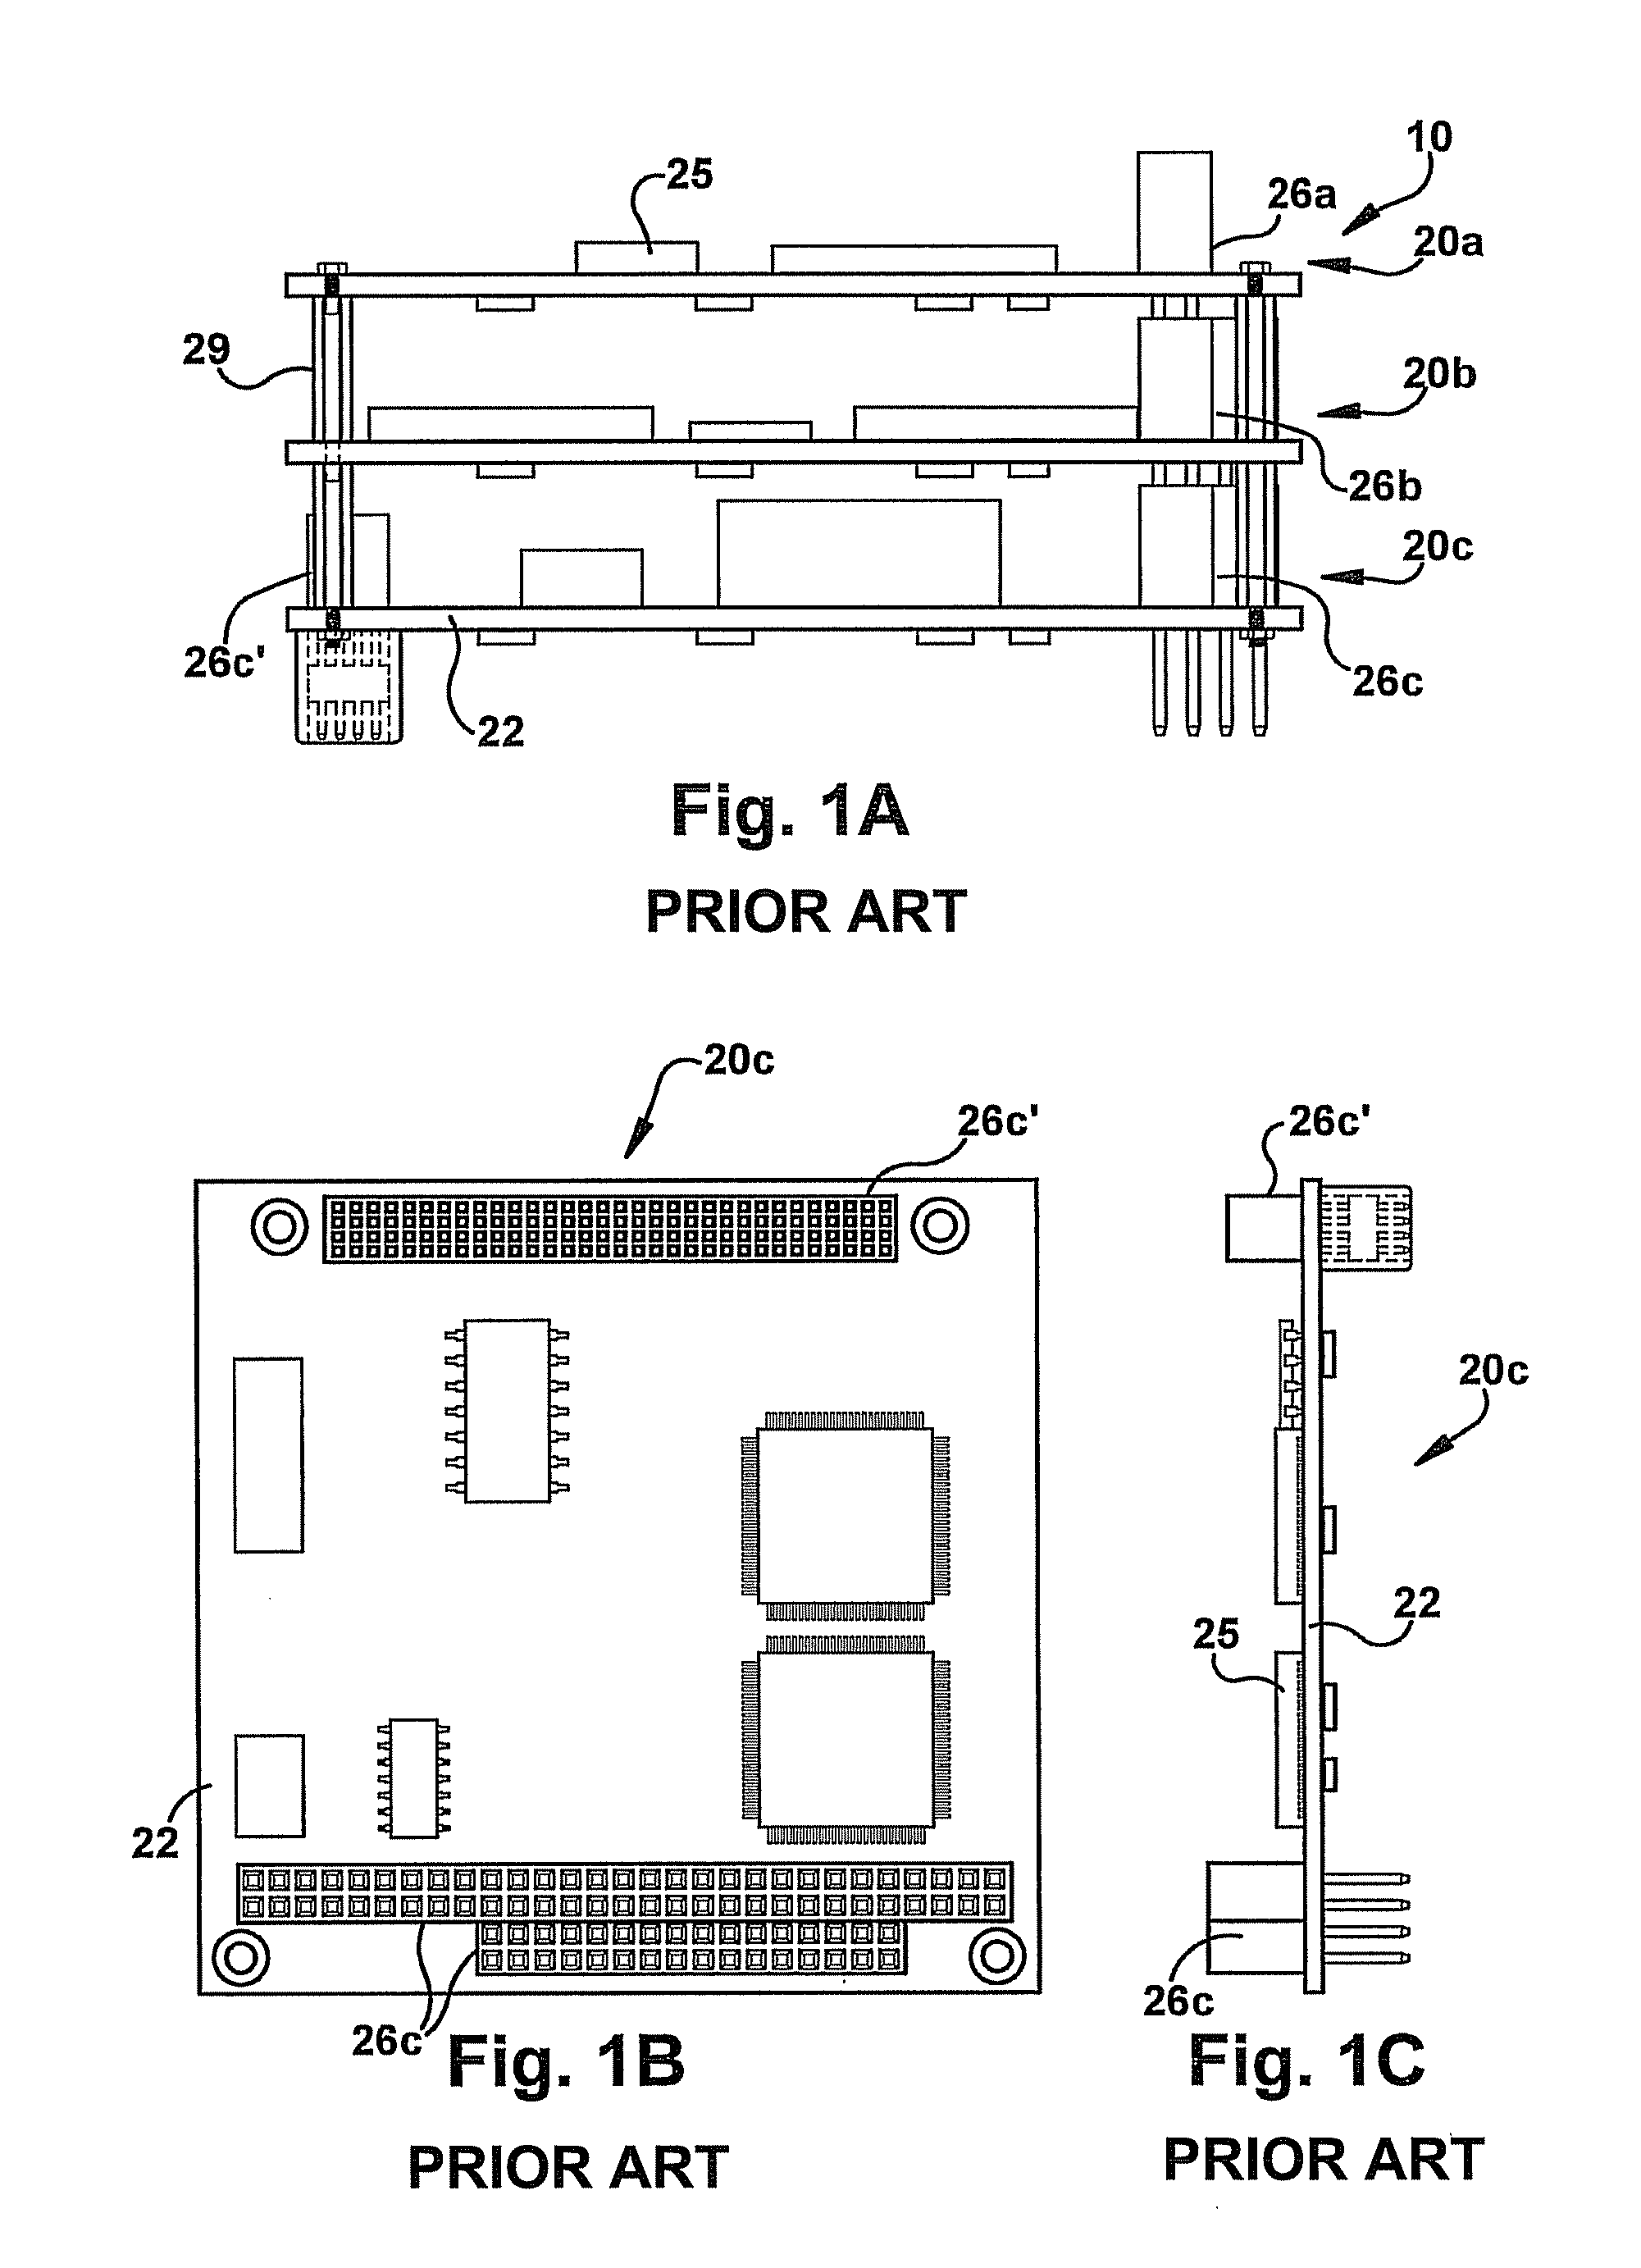 Systems for electrically connecting circuit board based electronic devices